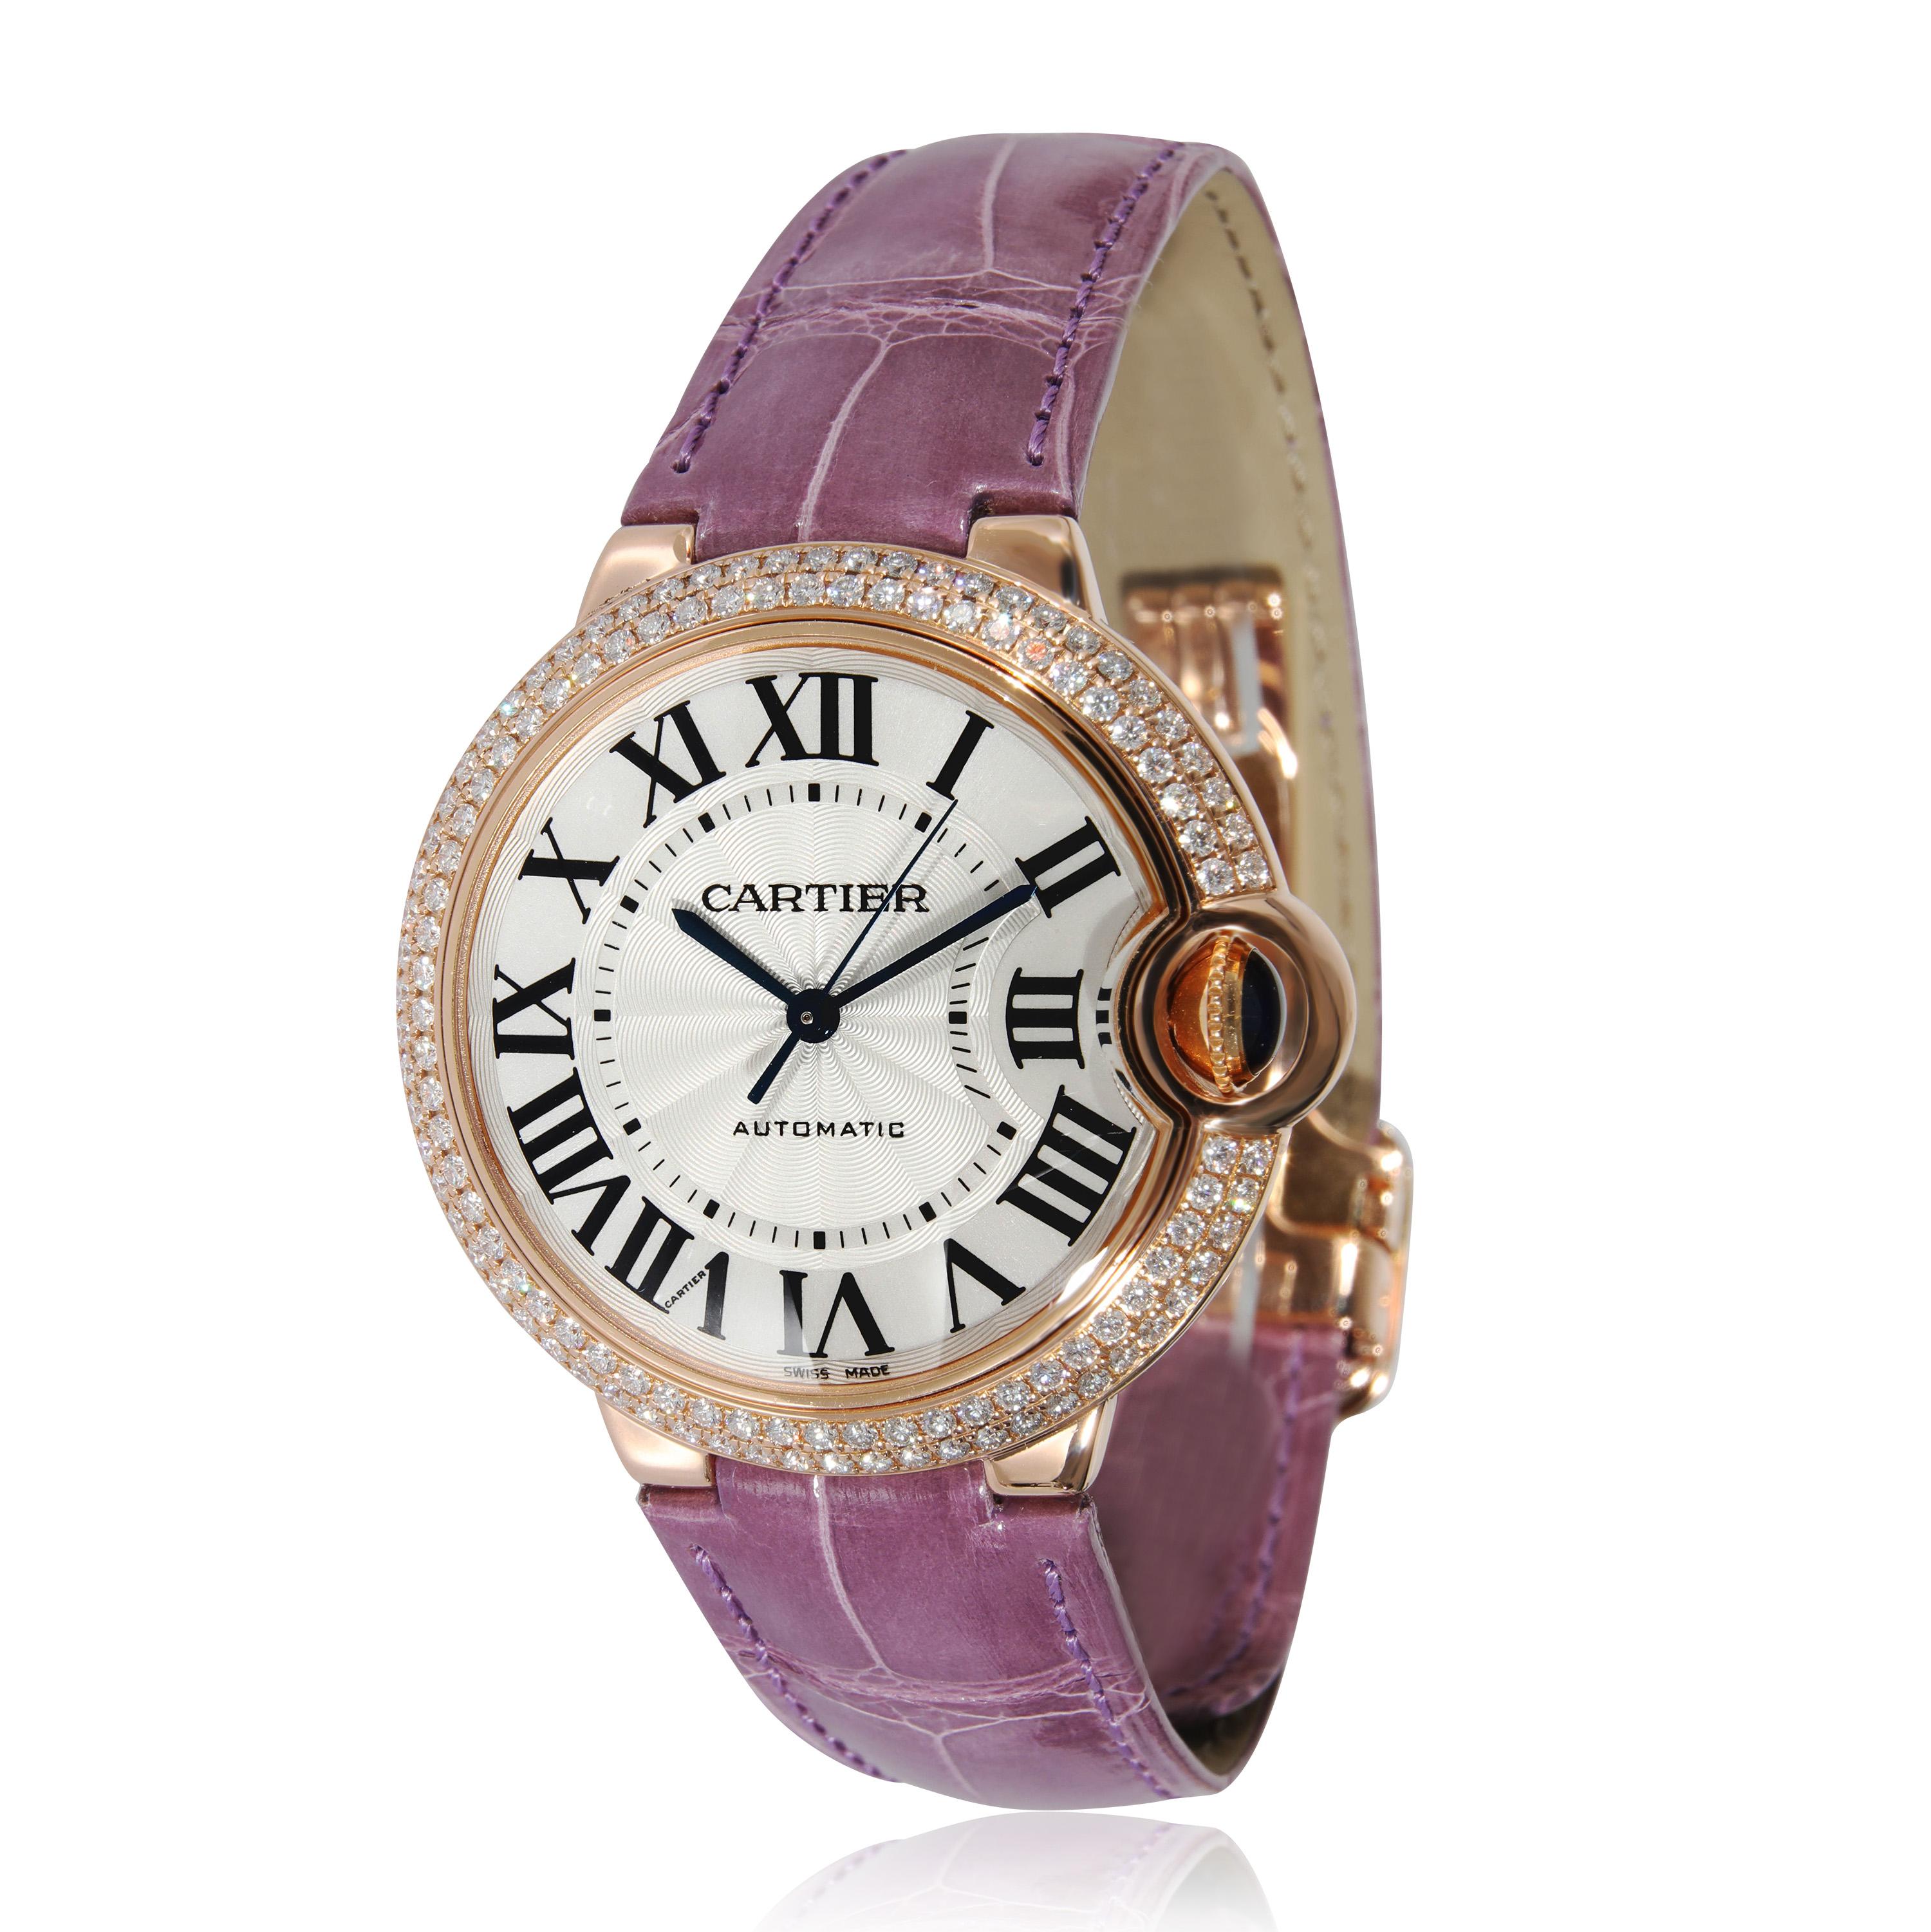 Cartier Ballon Bleu WJBB0009 Unisex Watch in 18kt Rose Gold

SKU: 129939

PRIMARY DETAILS
Brand: Cartier
Model: Ballon Bleu
Country of Origin: Switzerland
Movement Type: Mechanical: Automatic/Kinetic
Year of Manufacture: 2010-2019
Condition: